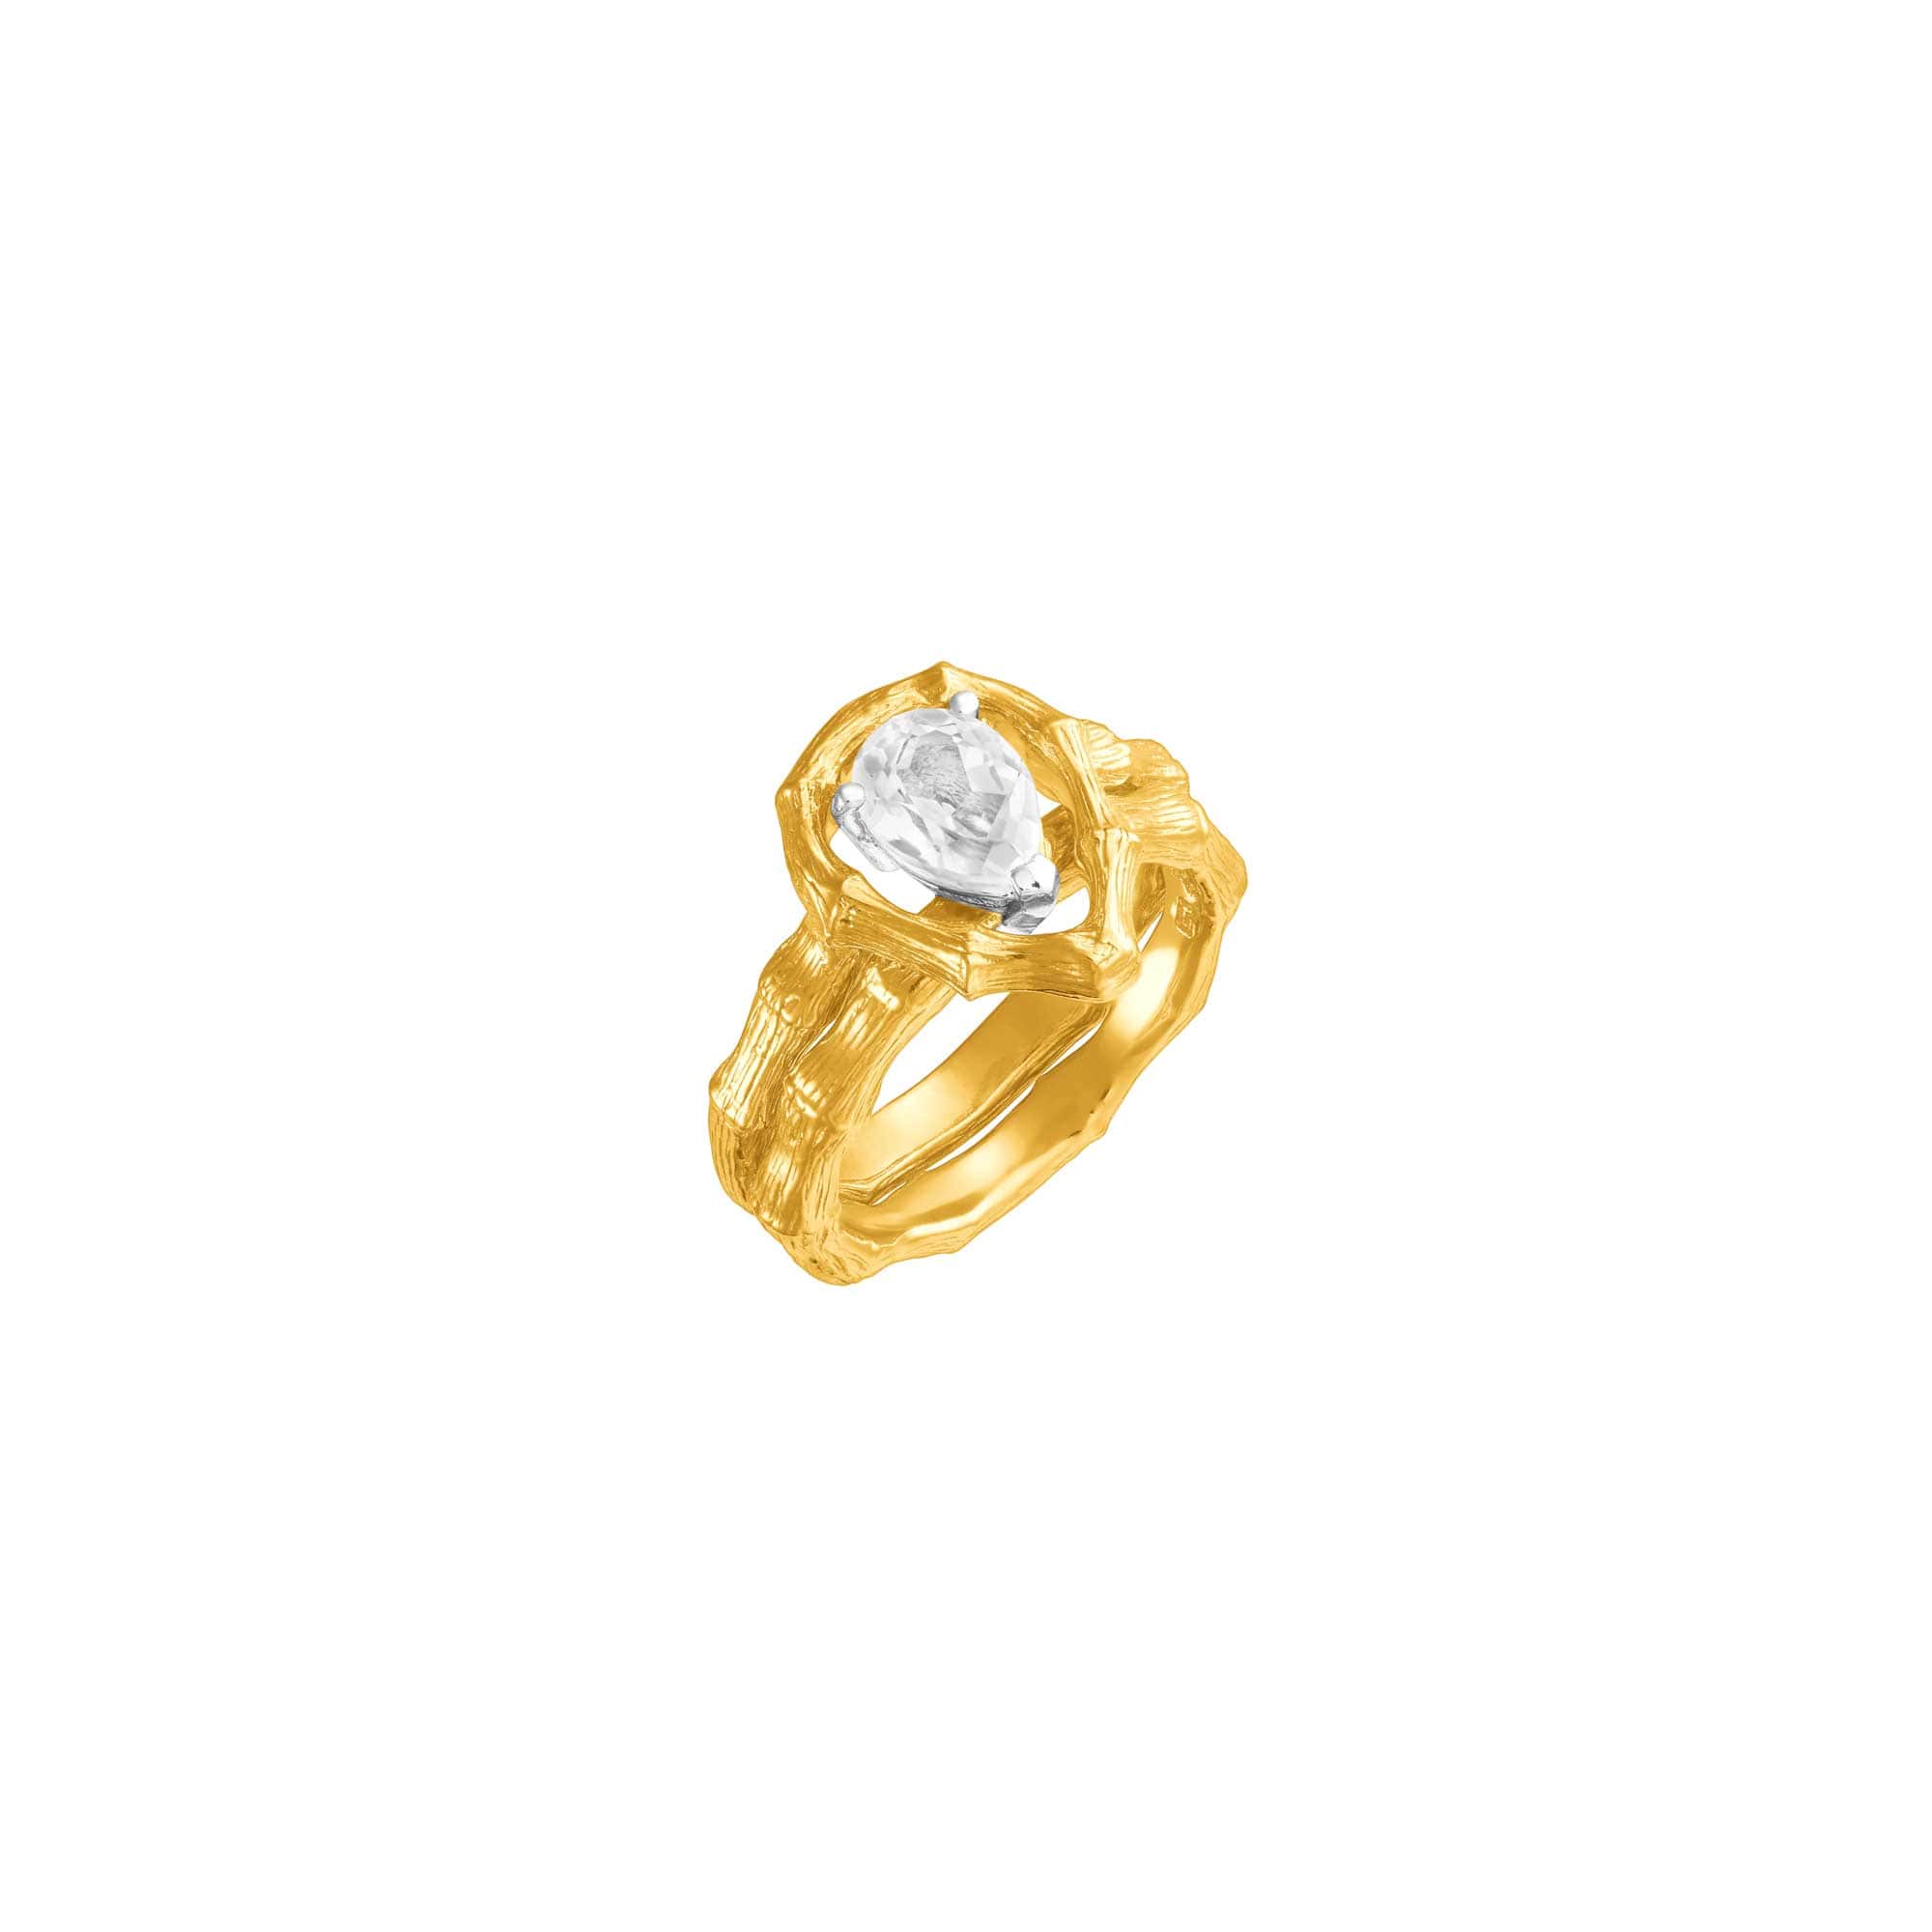 Vintage Bamboo Ring with White Topaz